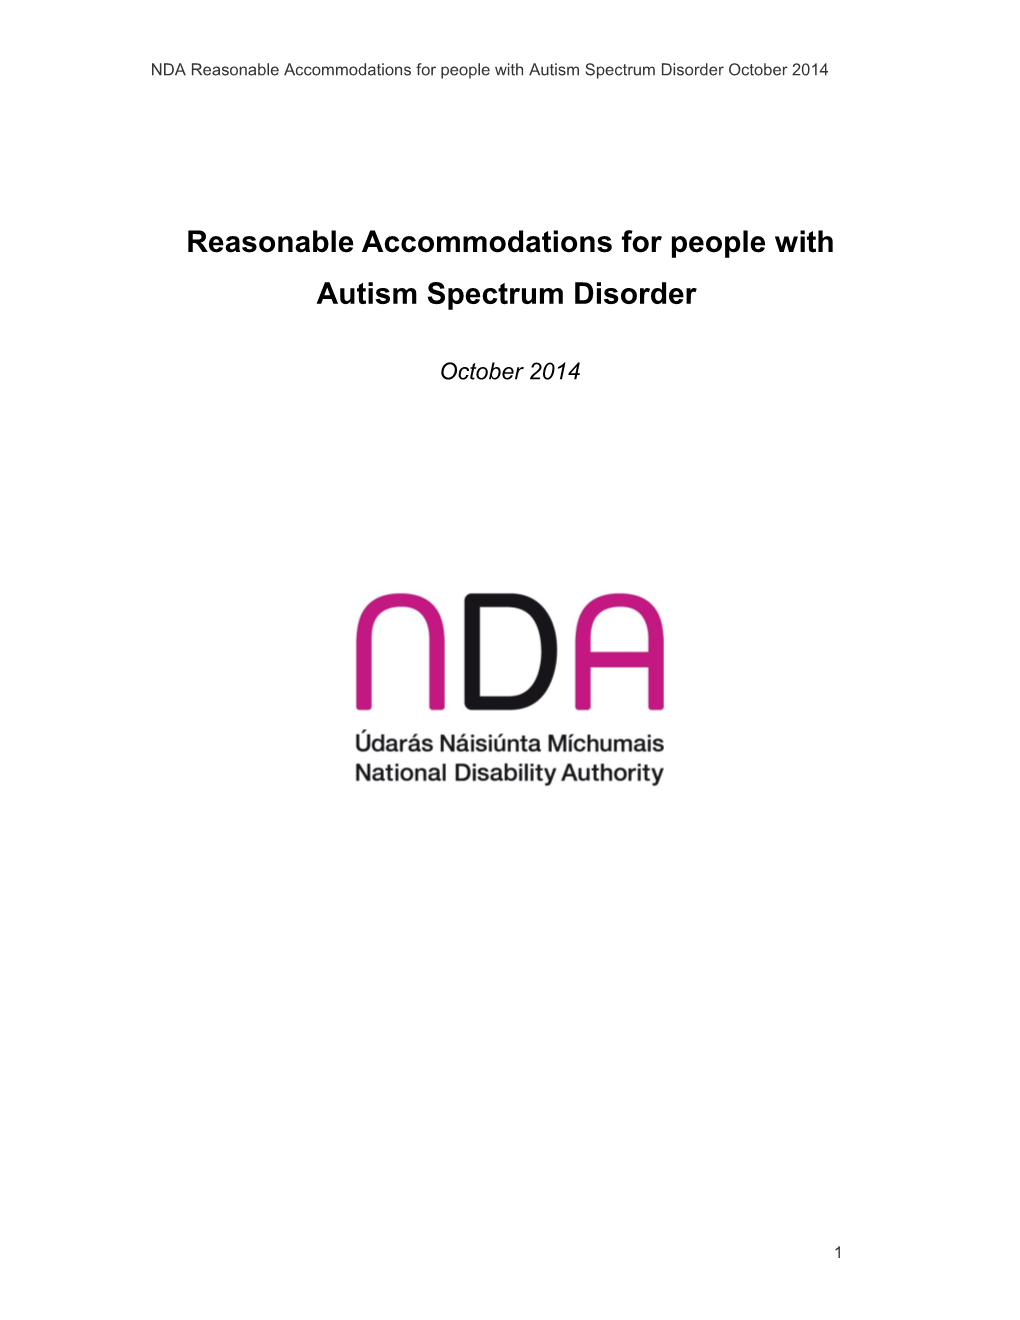 Reasonable Accommodations for People with Autism Spectrum Disorder